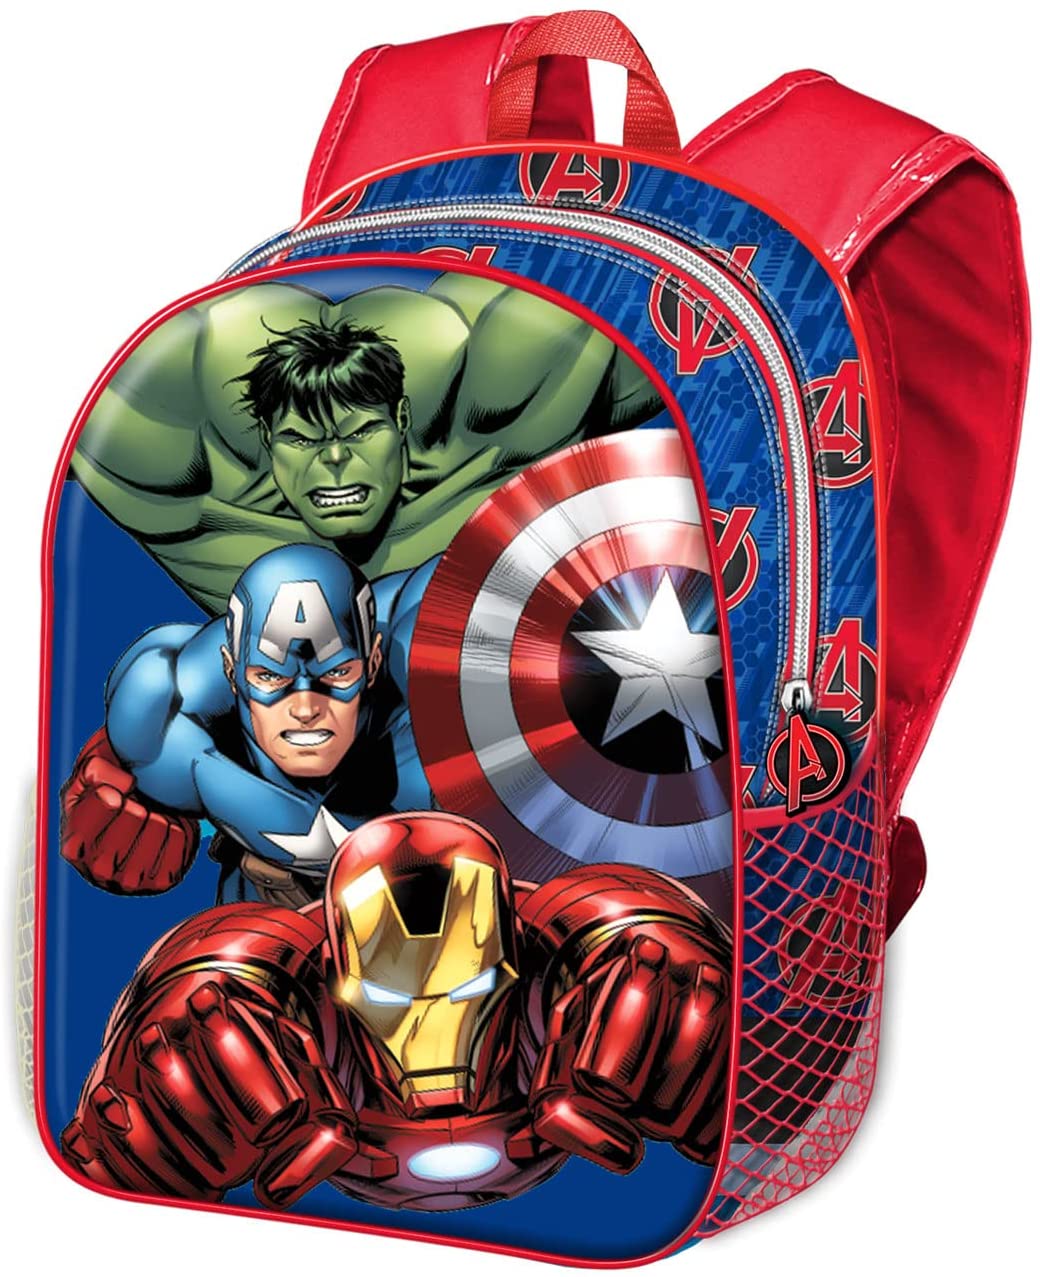 The Avengers Go On-Small 3D Backpack, Blue